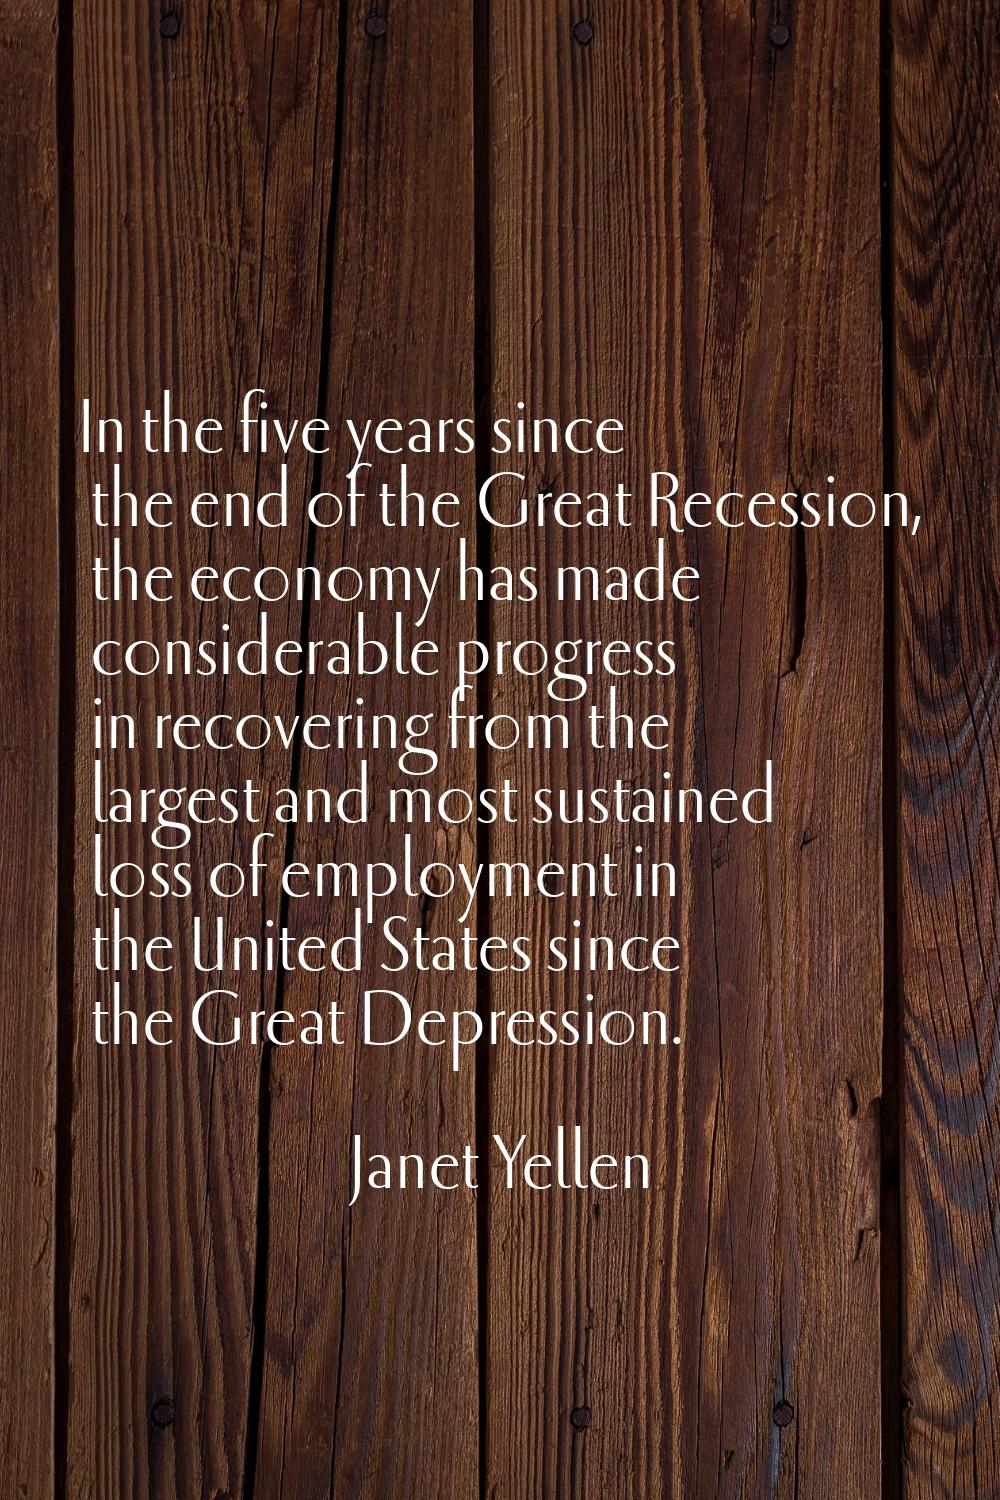 In the five years since the end of the Great Recession, the economy has made considerable progress 